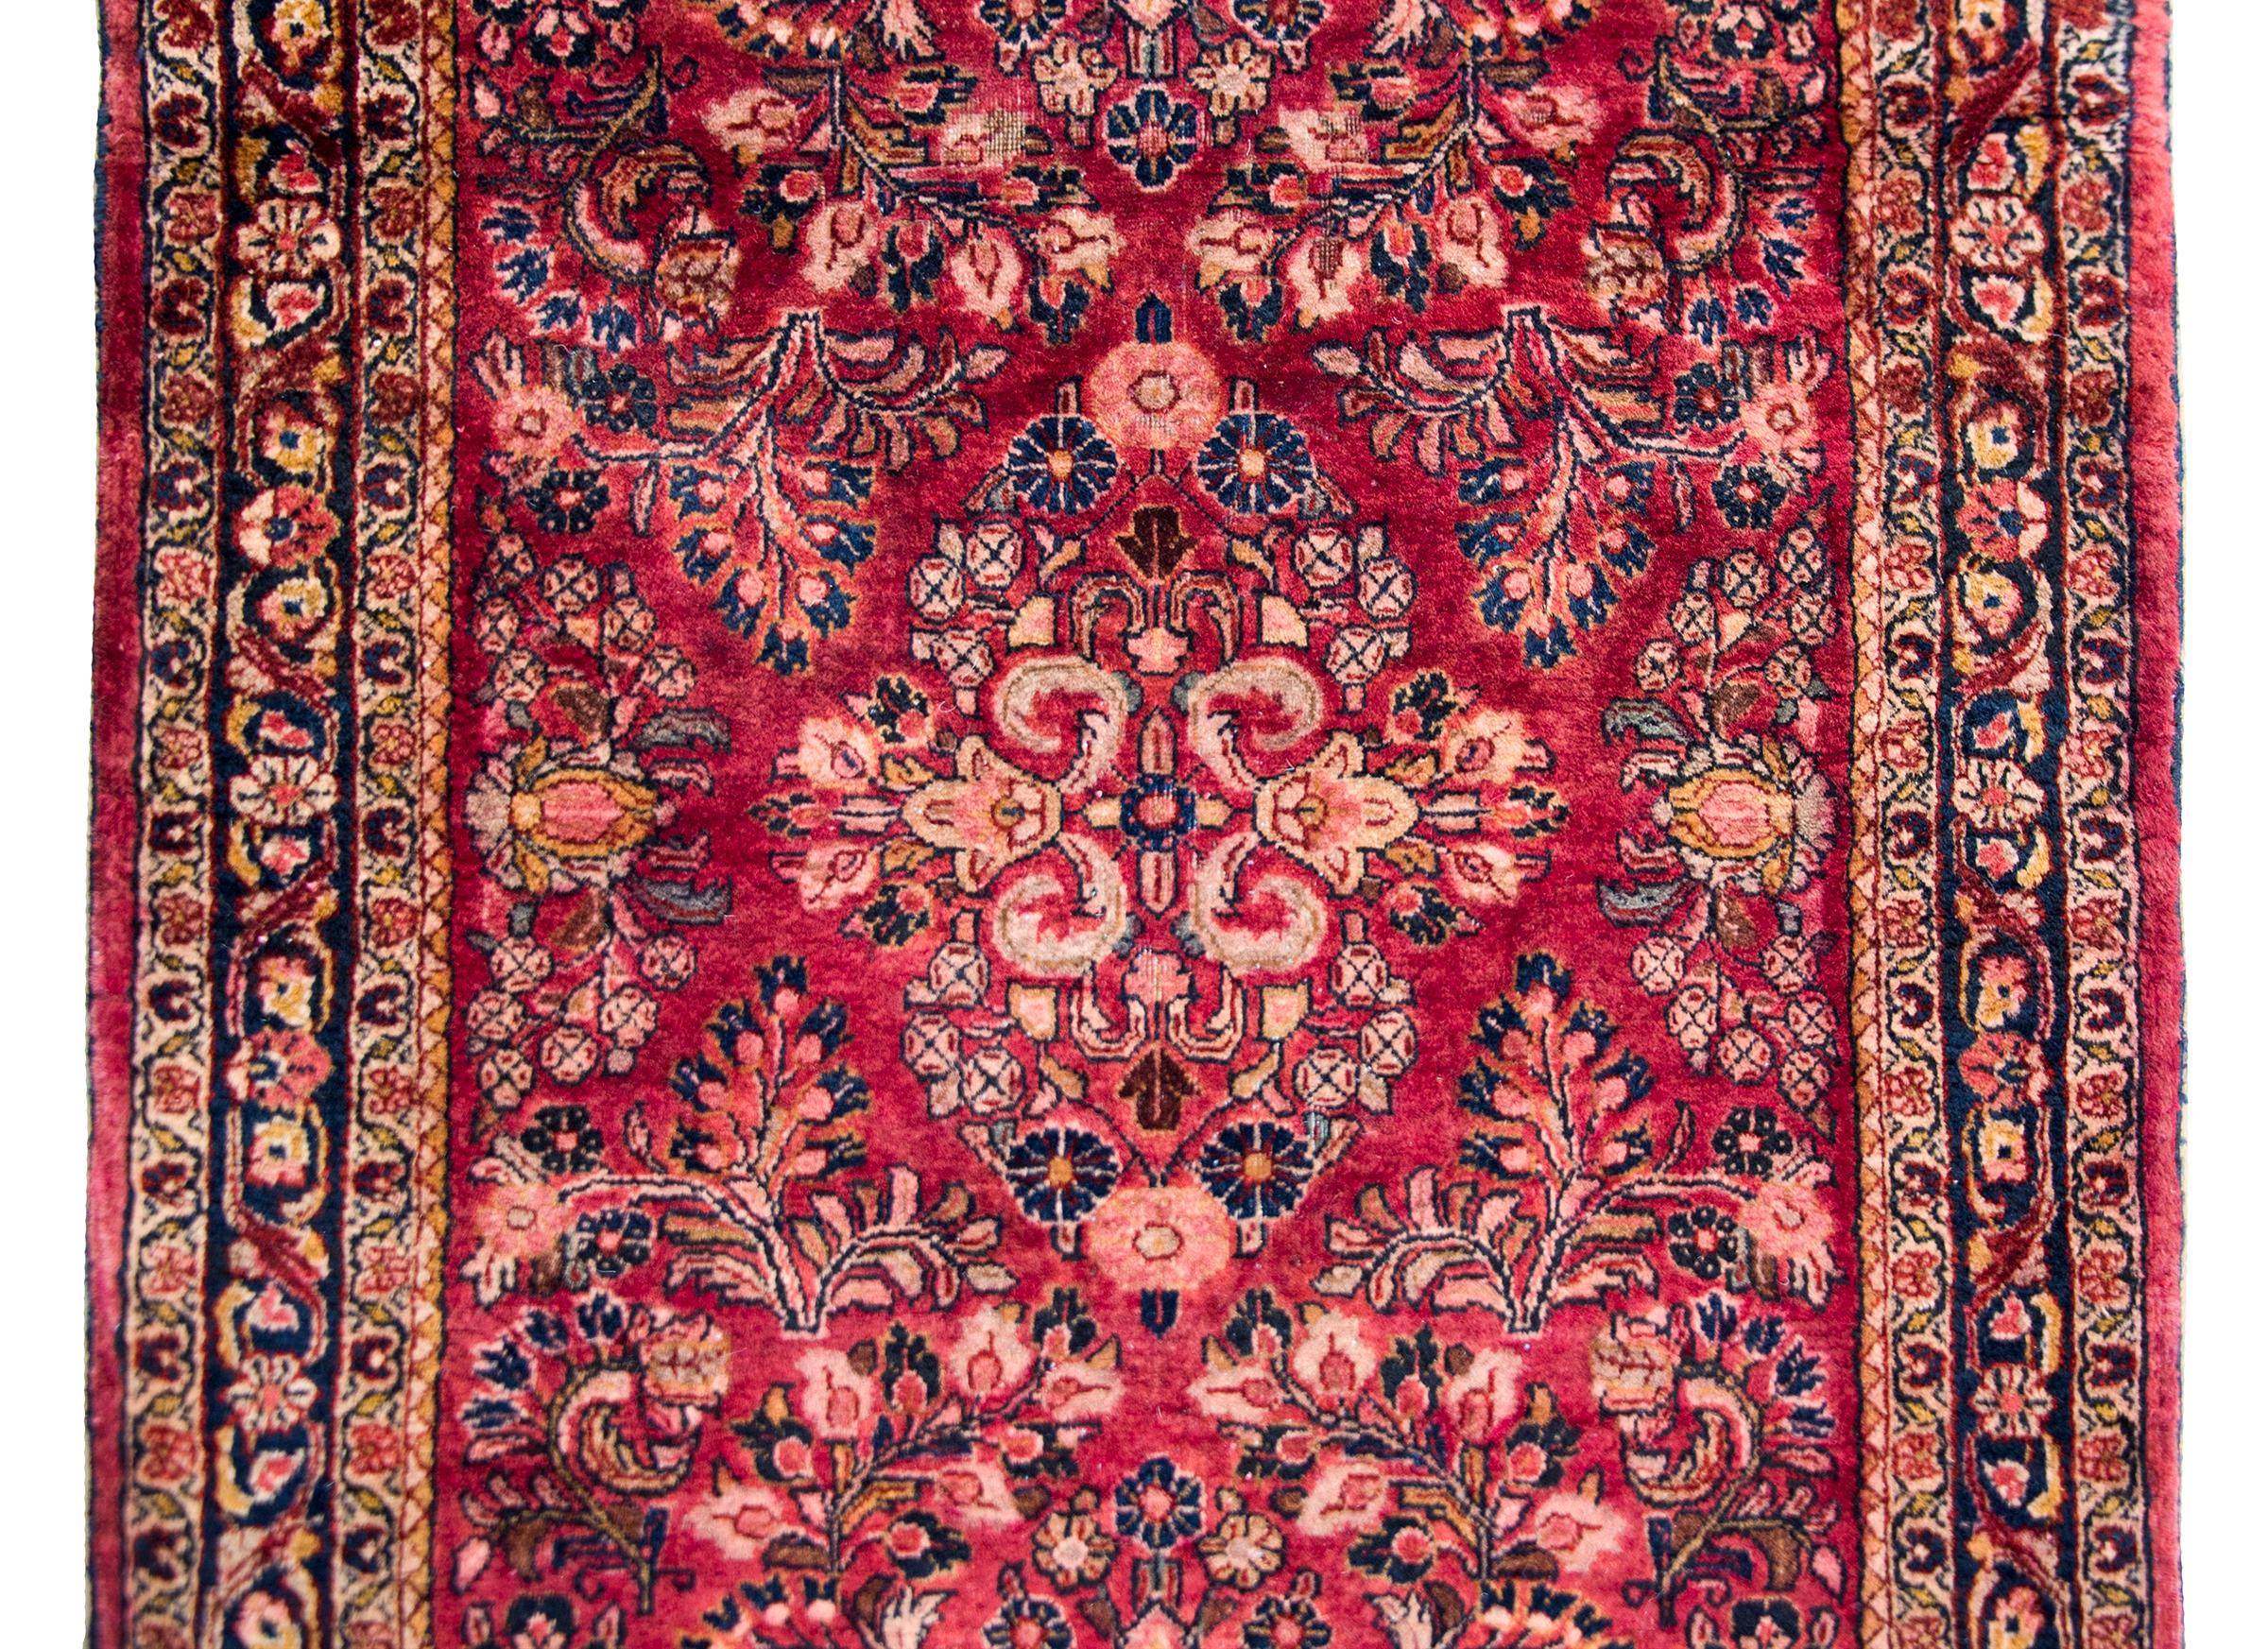 A remarkable early 20th century Persian Sarouk rug with a mirrored all-over floral cluster pattern with myriad floral varieties, surrounded by a complex border of petite floral patterned stripes, and all woven in cranberry, cream, pink, and light